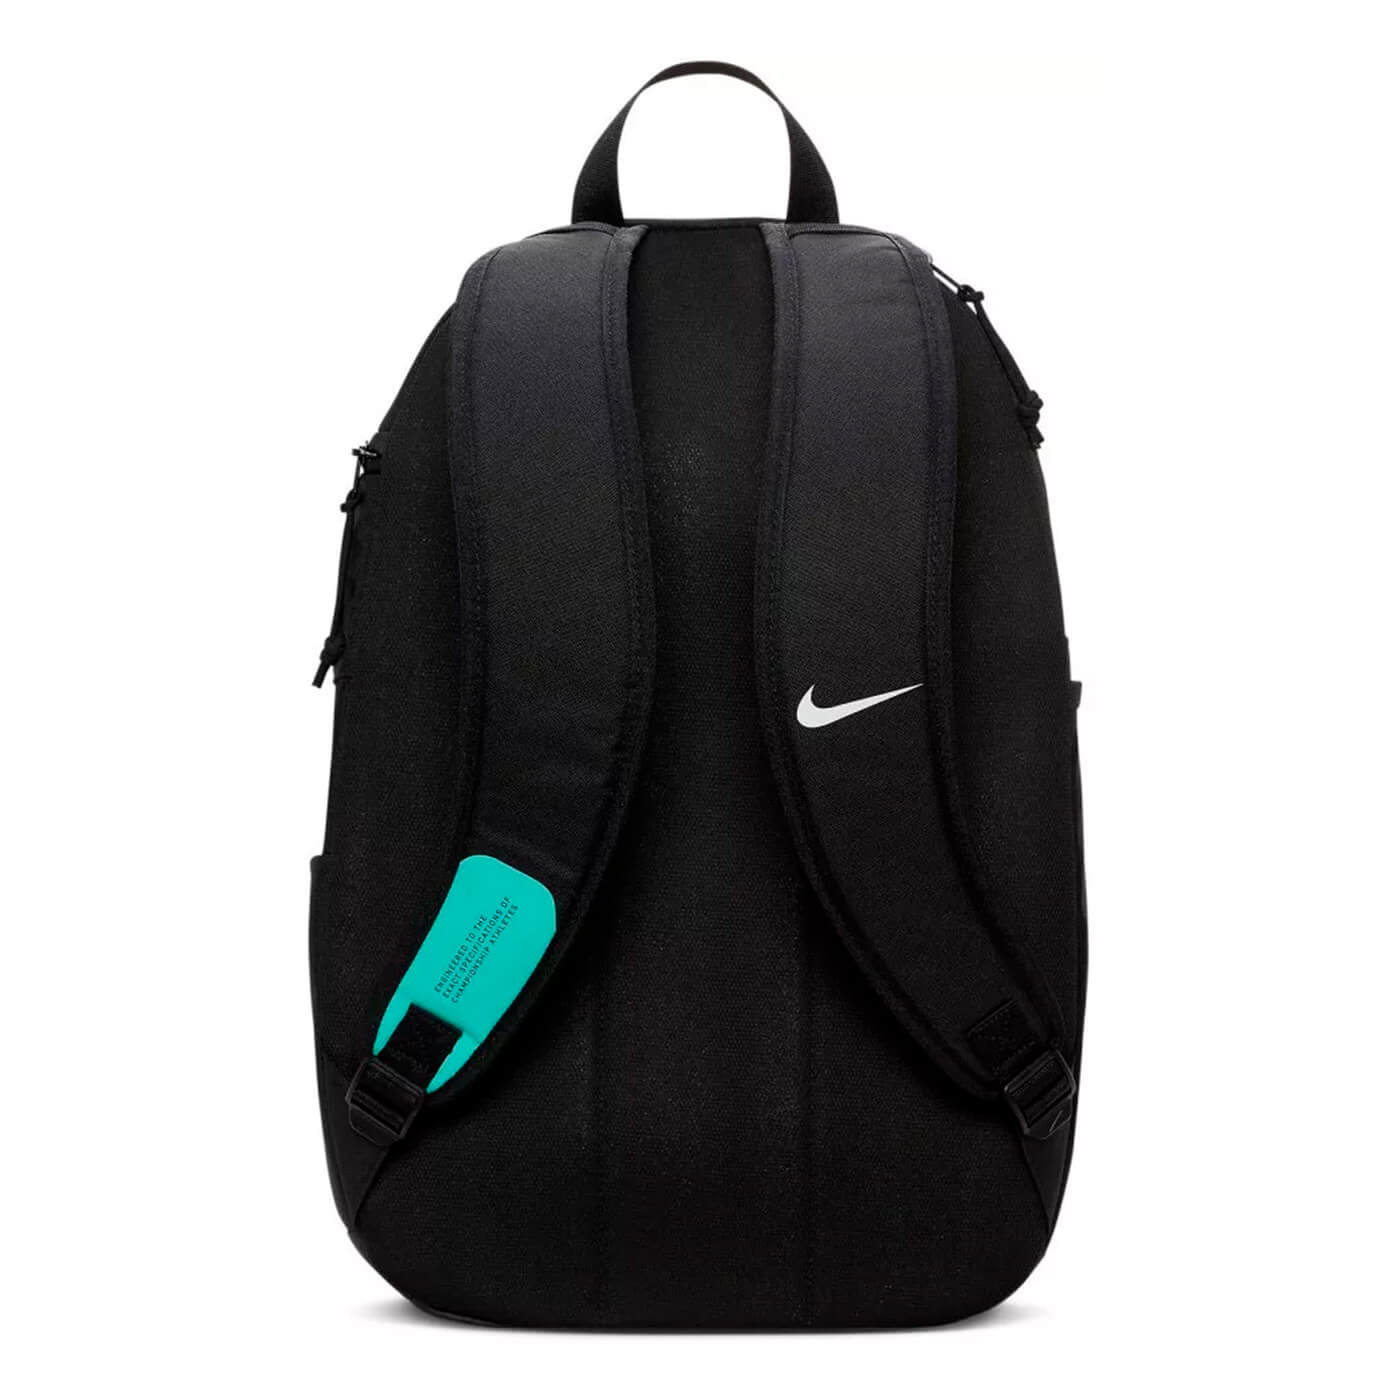 Academy Team Storm-FIT football backpack, with ball pocket, Turquoise